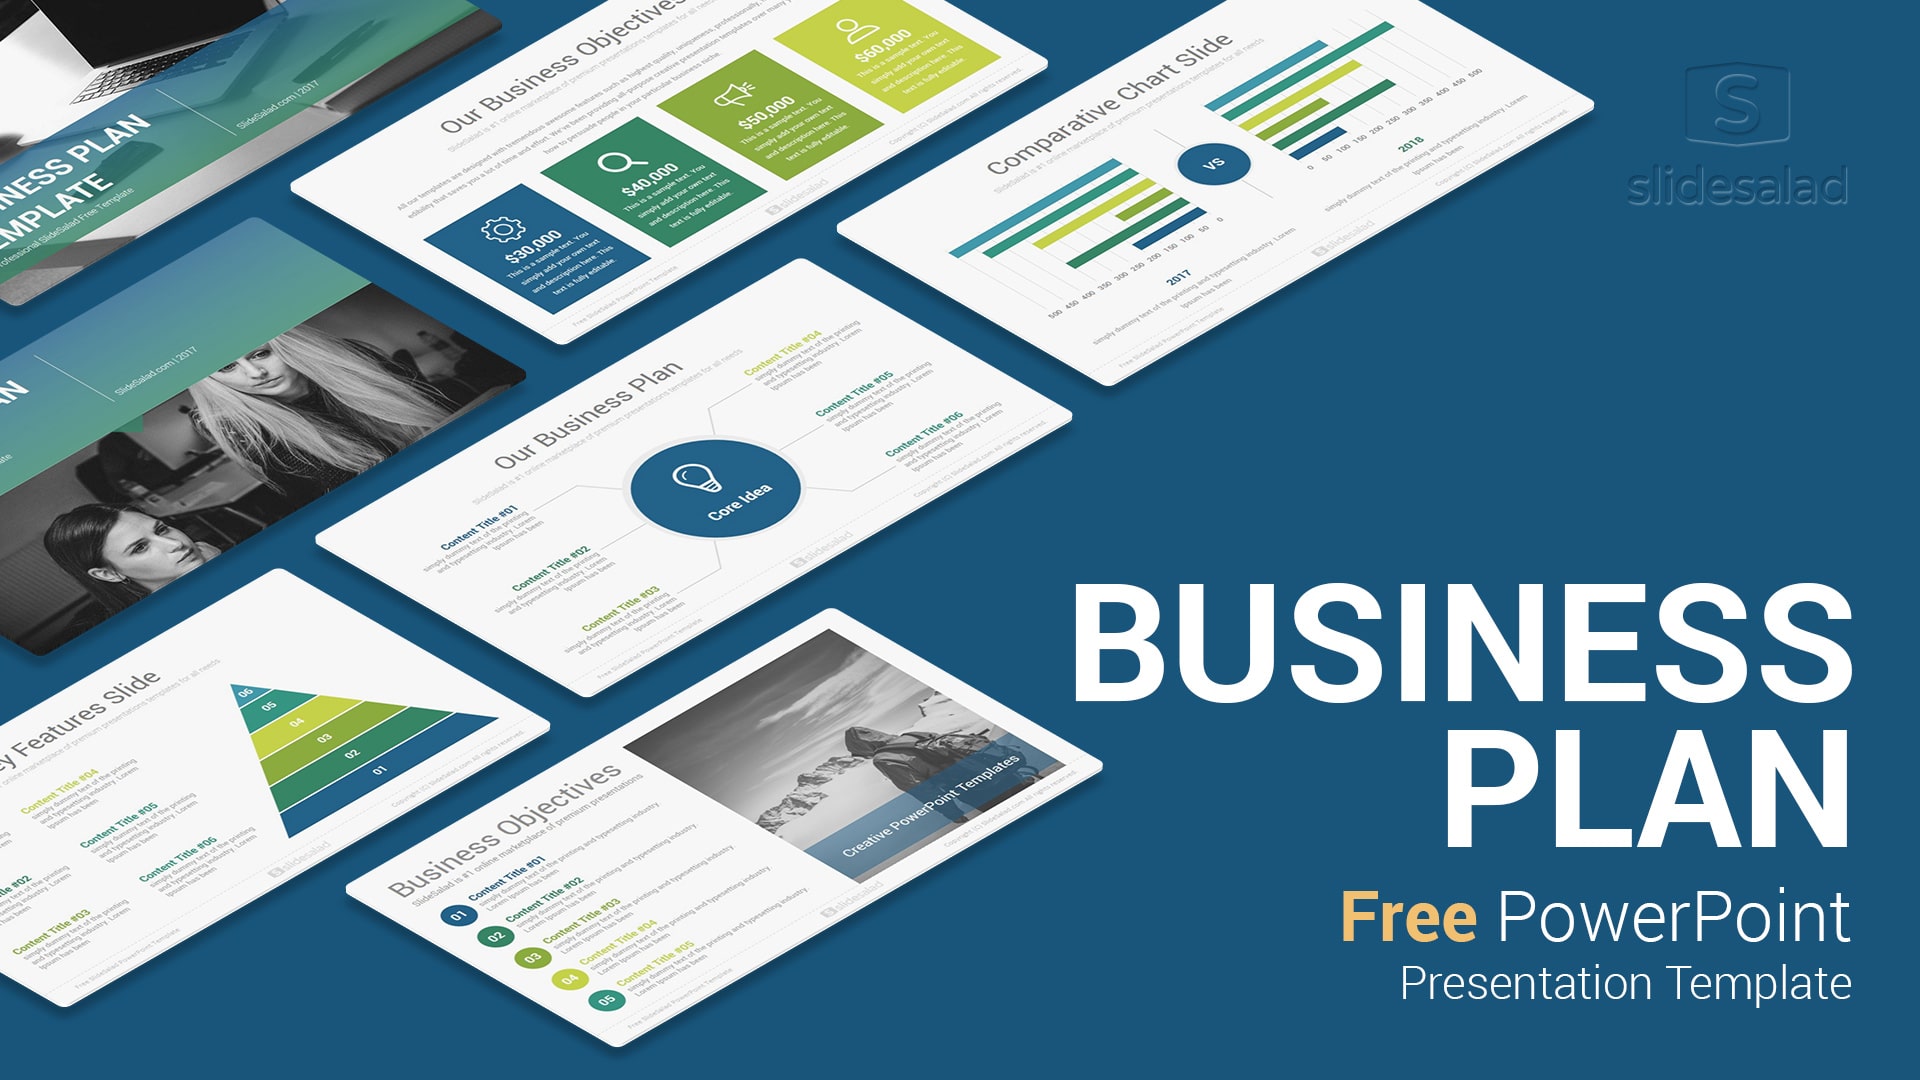 Business Plan Free PowerPoint Template